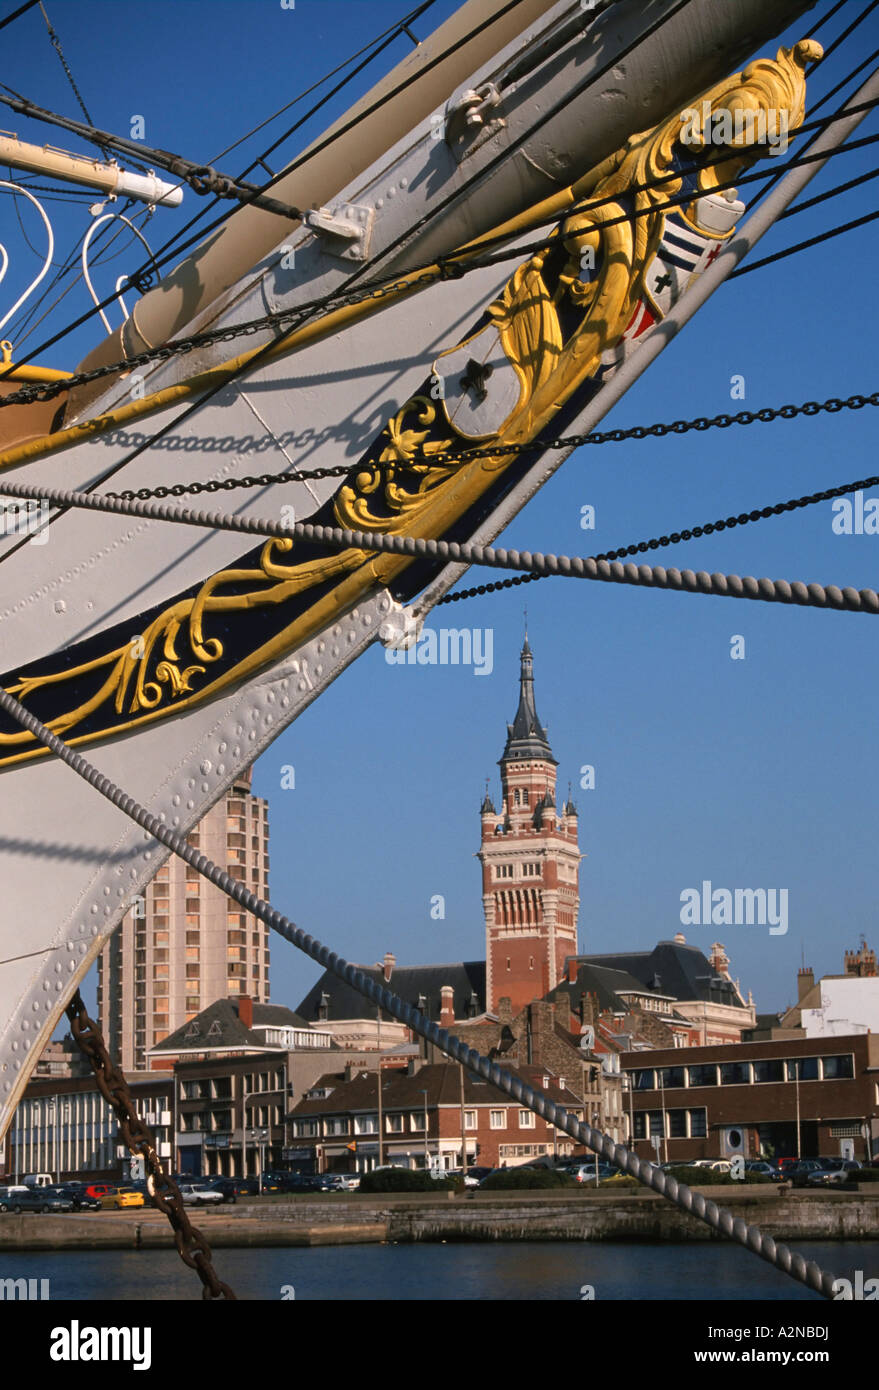 Ship's bow with city hall in background, Nord, Nord-Pas-de-Calais, France Stock Photo